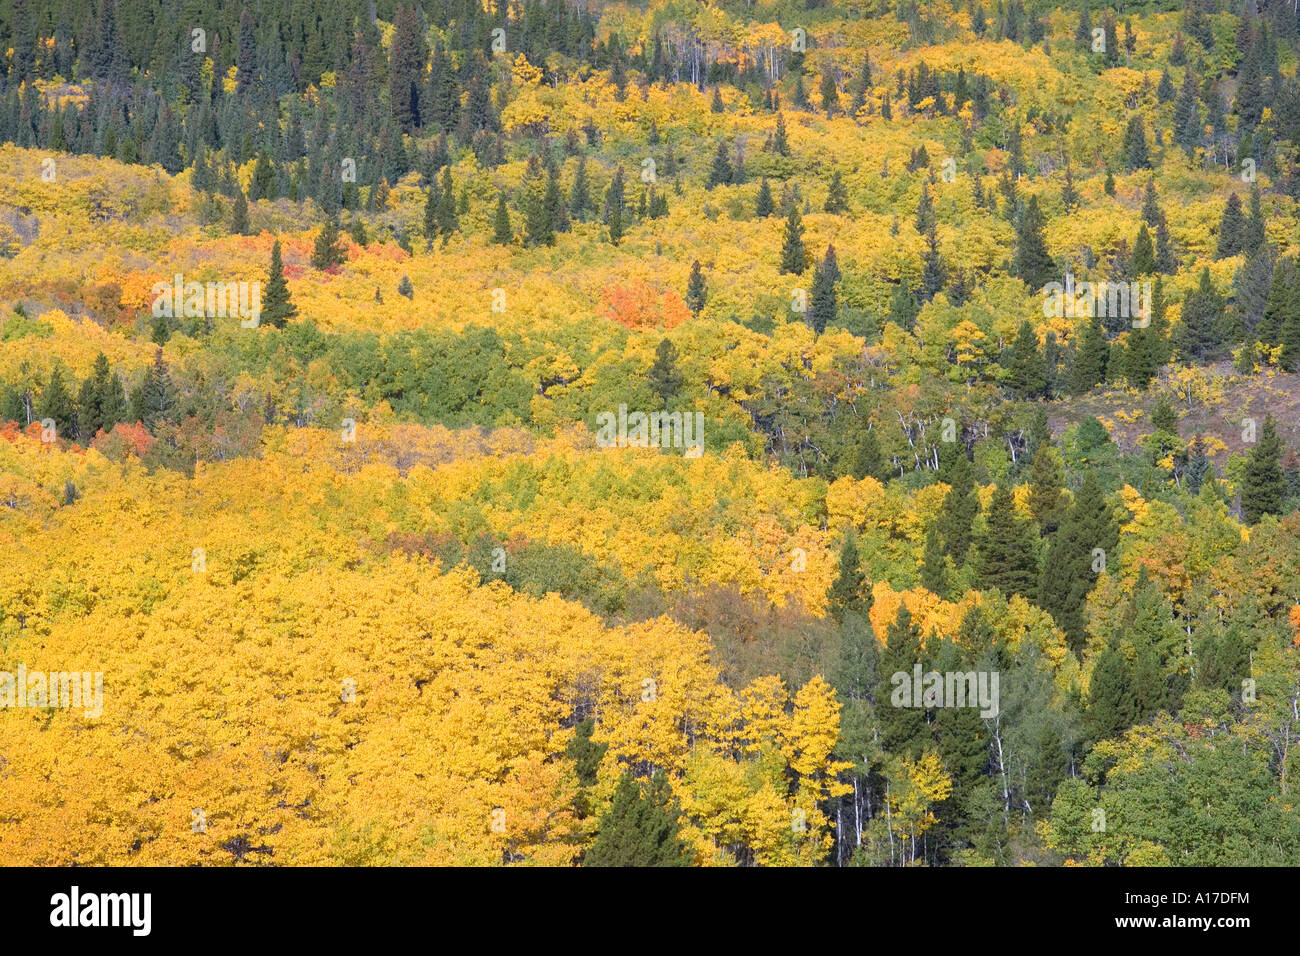 Fall colors with aspen trees in Northern Colorado Stock Photo